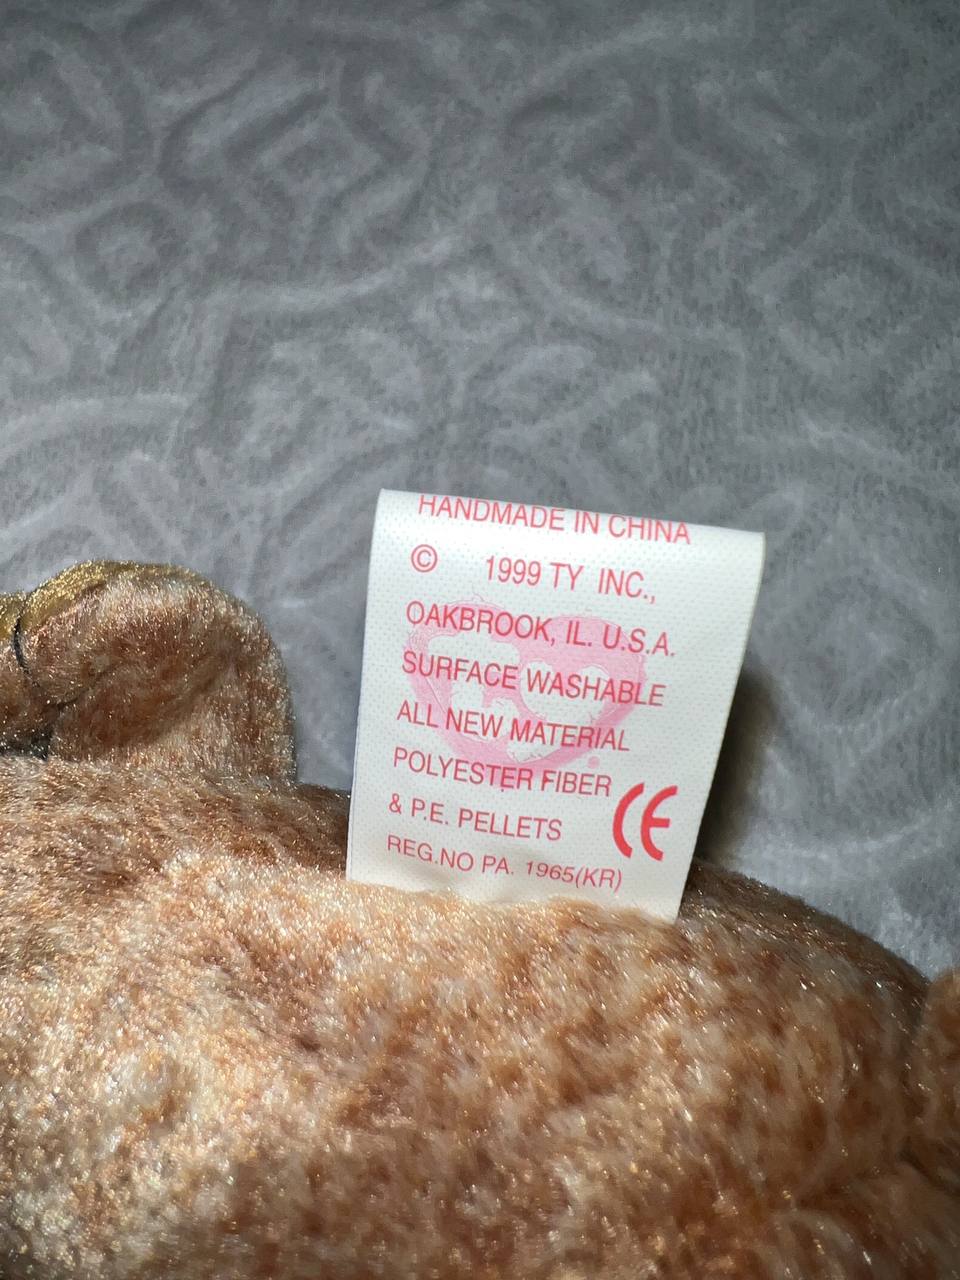 *RARE* MINT Pecan Beanie Baby 1999 With Tag